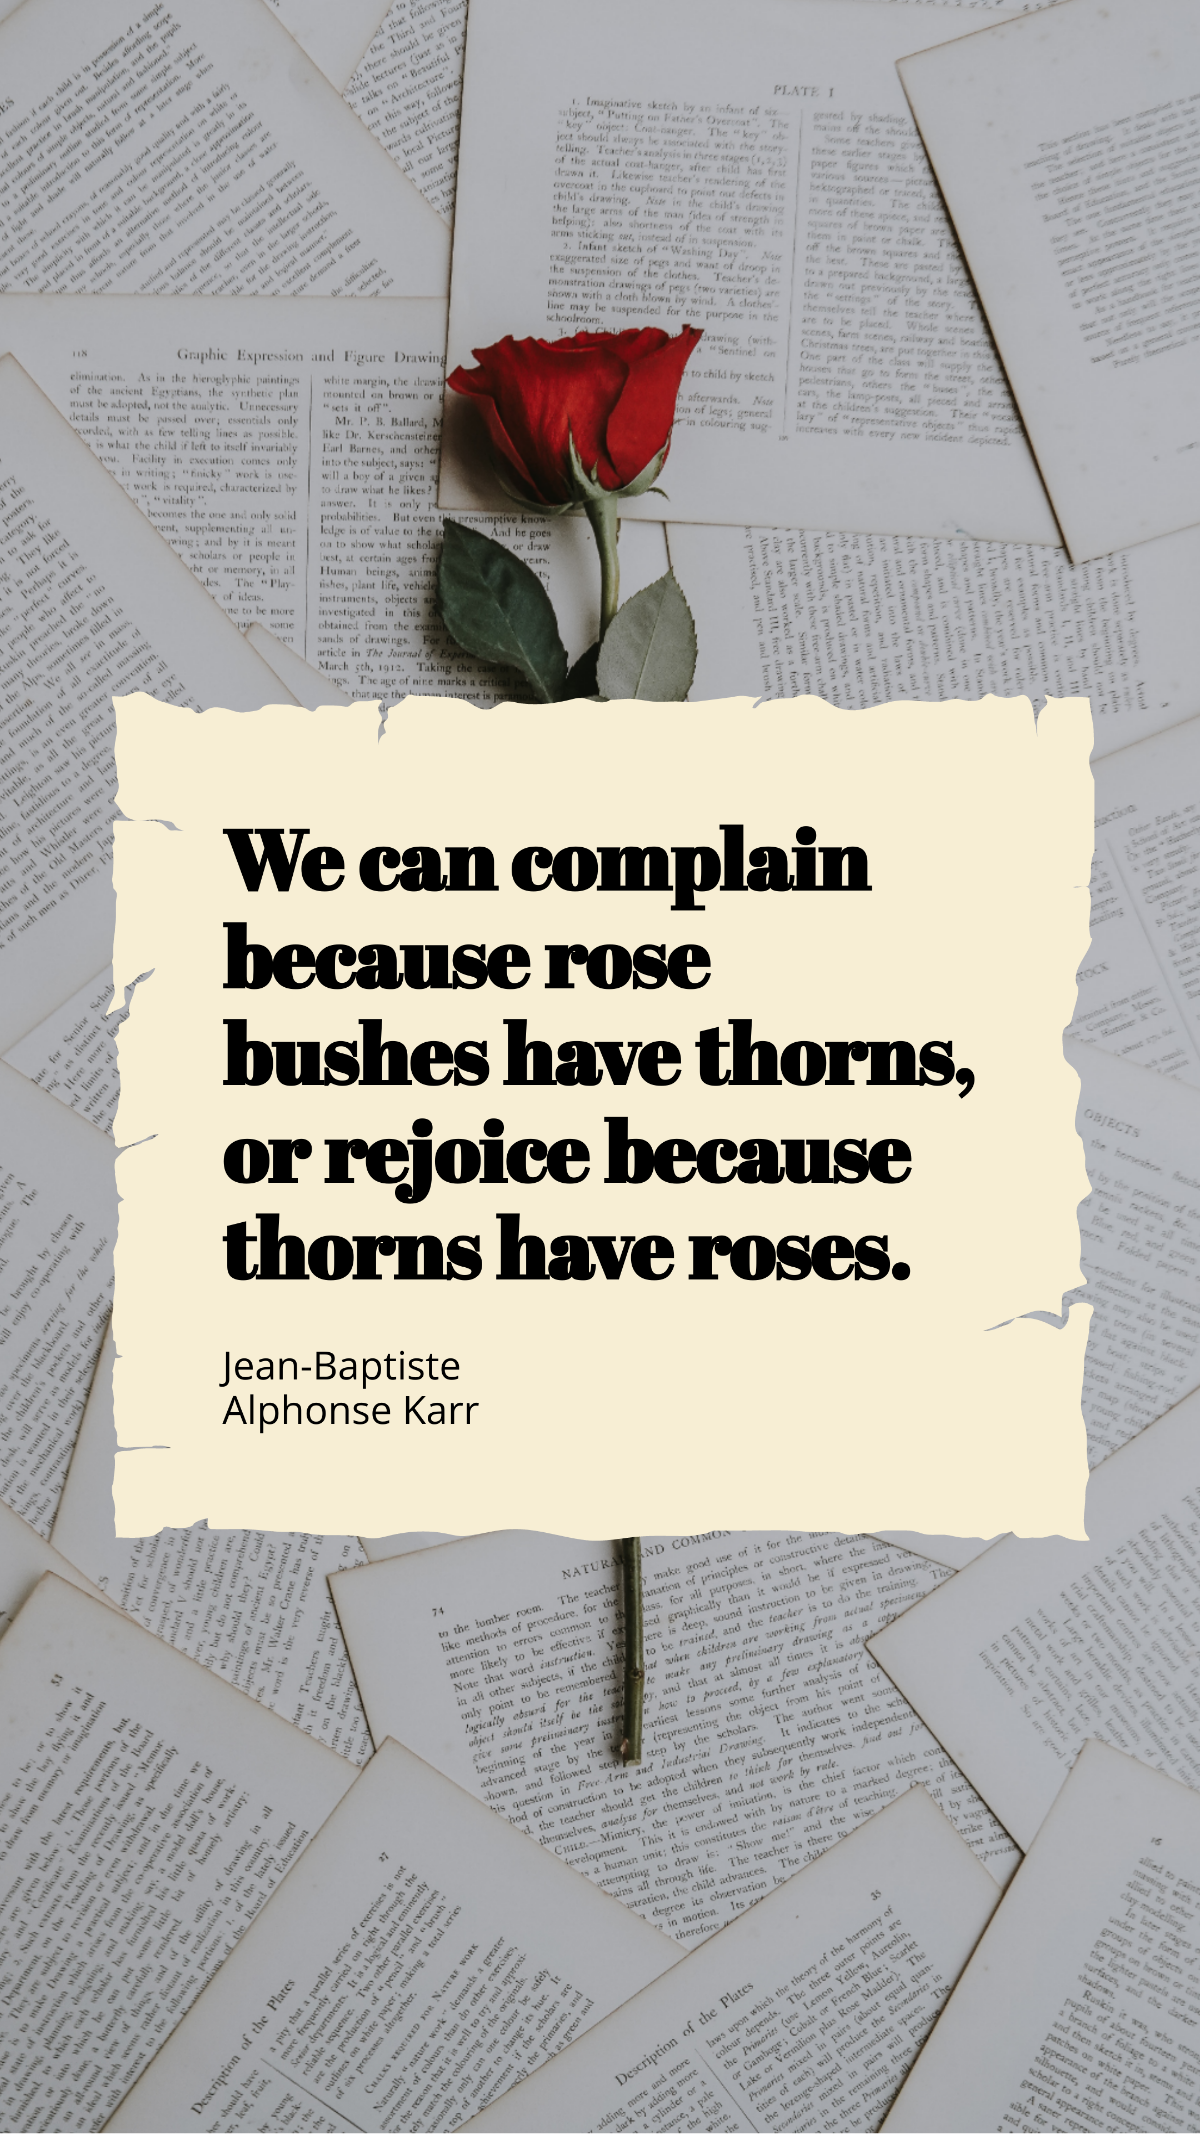 Jean-Baptiste Alphonse Karr - We can complain because rose bushes have thorns, or rejoice because thorns have roses. Template